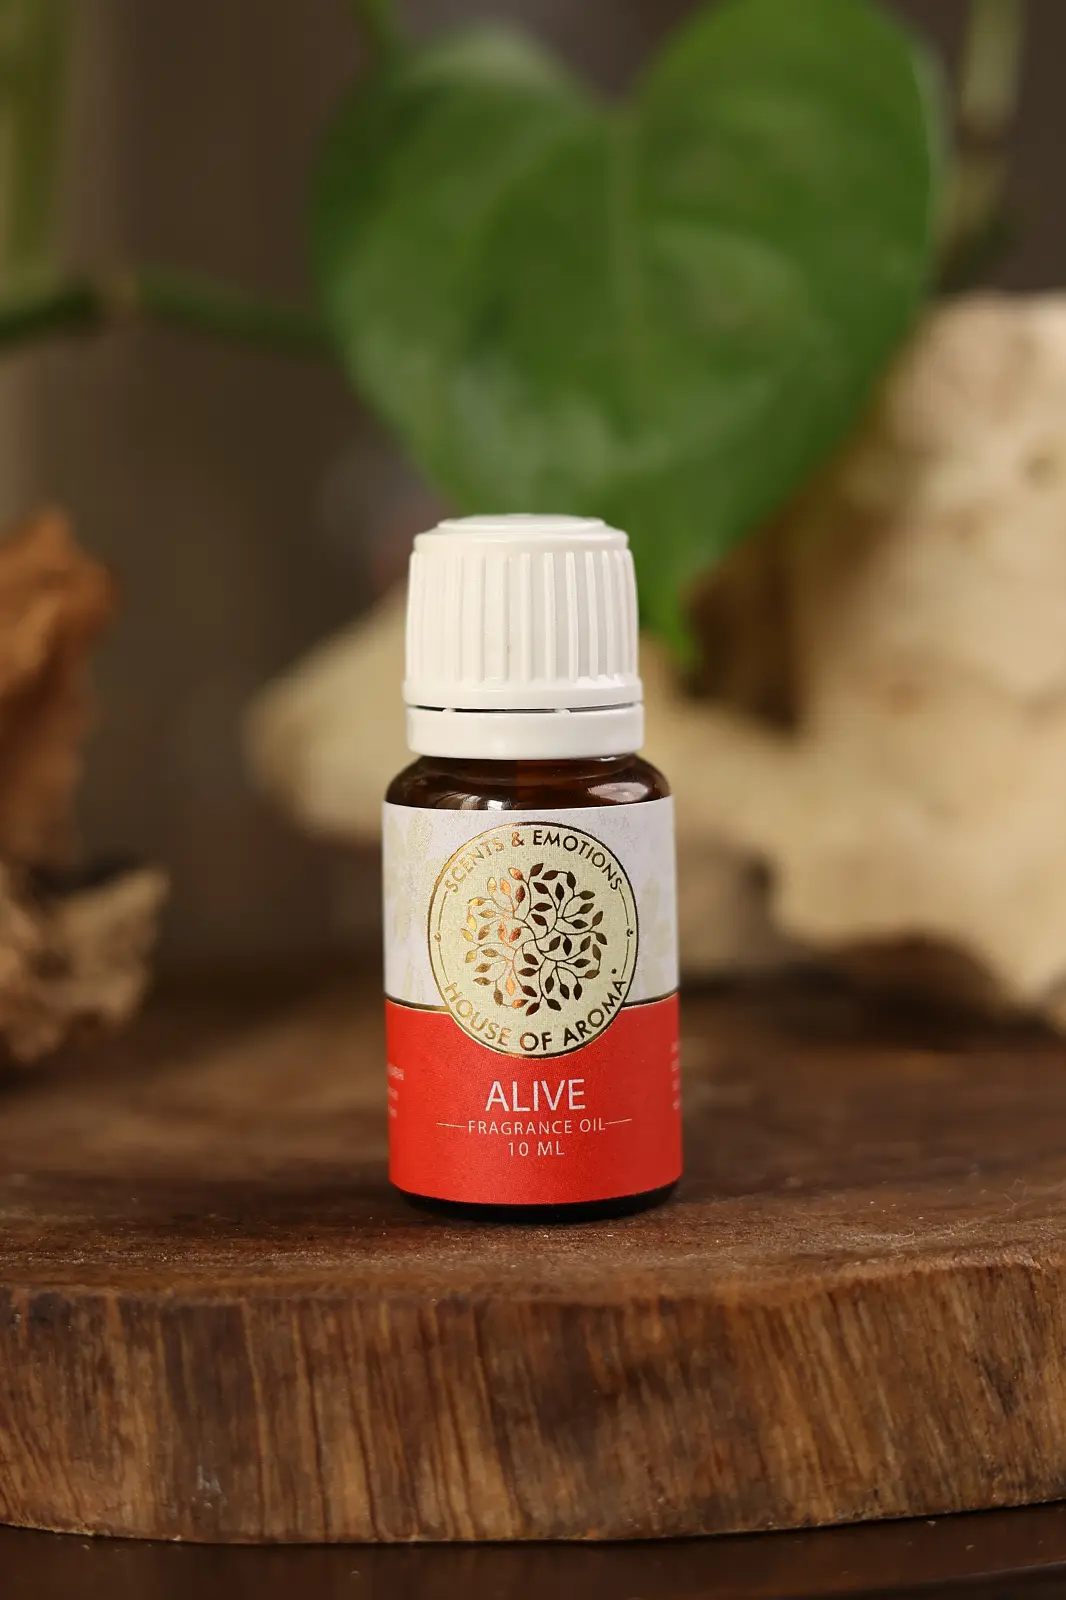 alive fragrance oil 100ml, Fragrance Oil, Aroma oil, Synthetic oils, Fragrance oil for candles, oil for diffusers, Aromatic oil, Candle oil, Aromatherapy oil, oil manufacturers, House of Aroma, alive fragrance oil, fragrance oil for candles, floral scents, alive oil, alive scented oil, alive aroma oil, alive oil benefits, alive oil uses, alive fragrance oil, fragrance brands in India